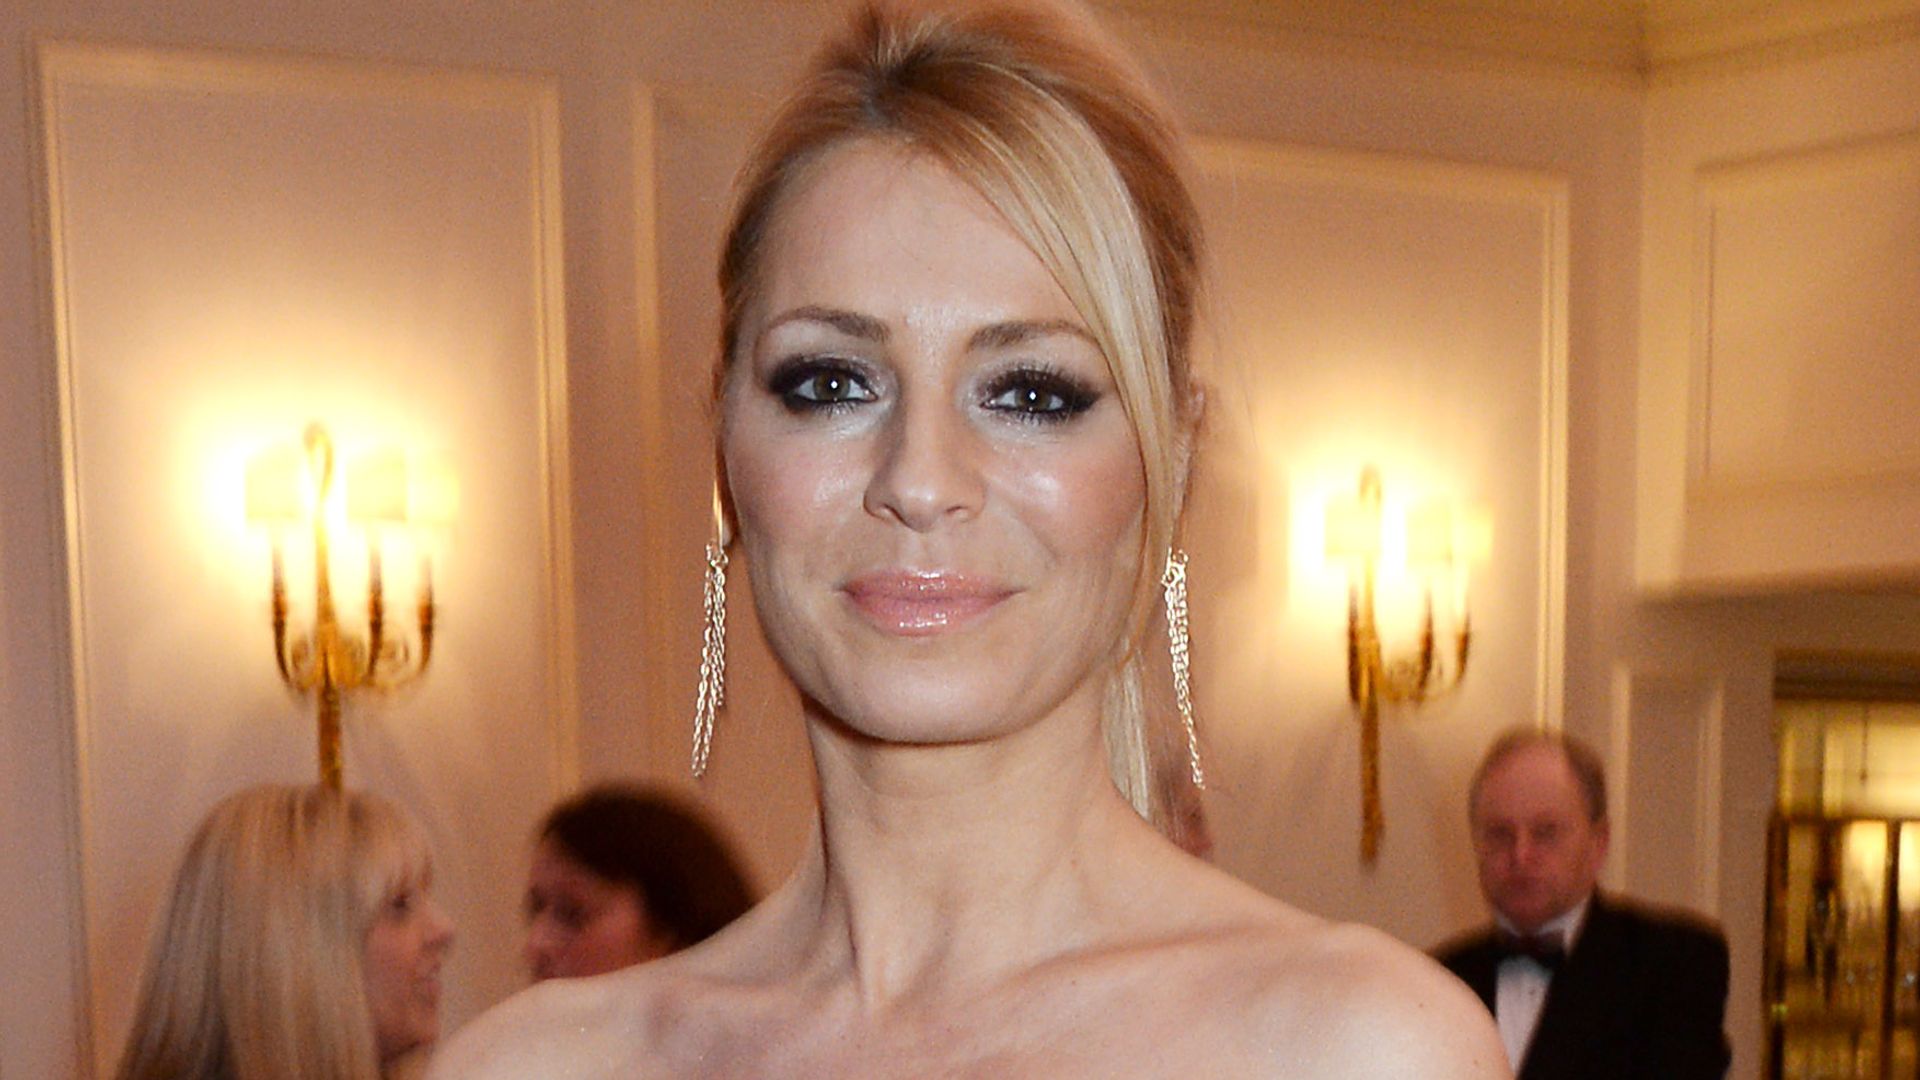 Strictly's Tess Daly 'fell apart' over heartbreak days after Vernon Kay wedding